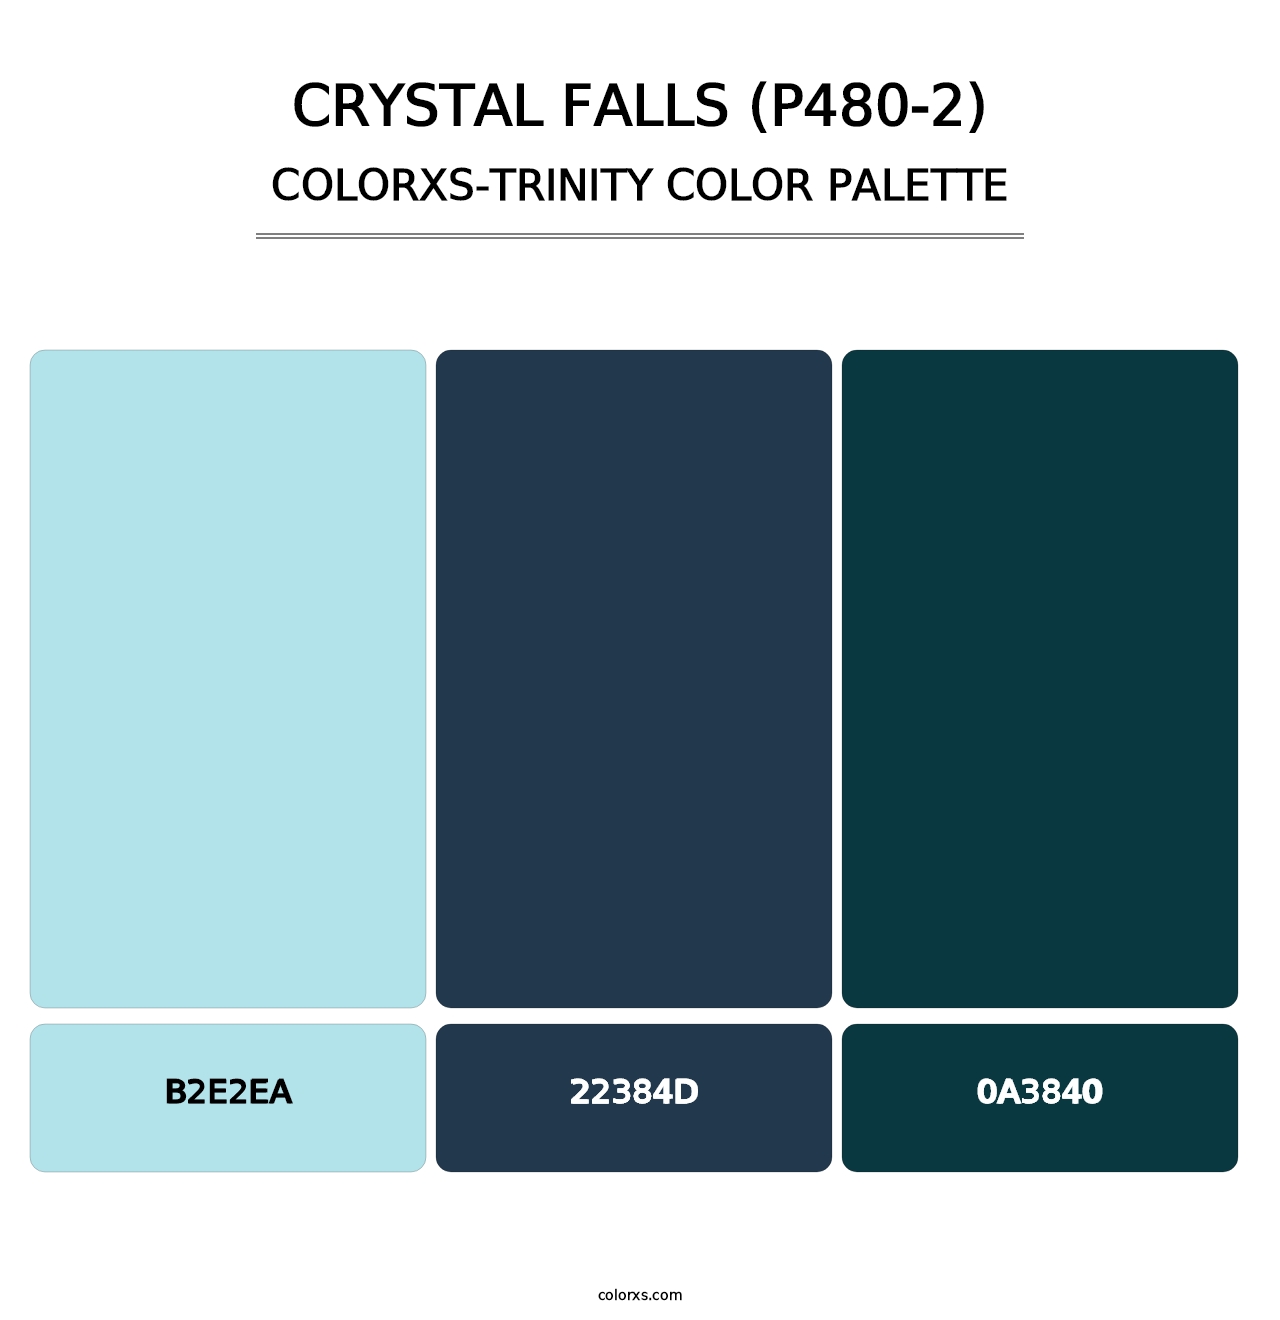 Crystal Falls (P480-2) - Colorxs Trinity Palette